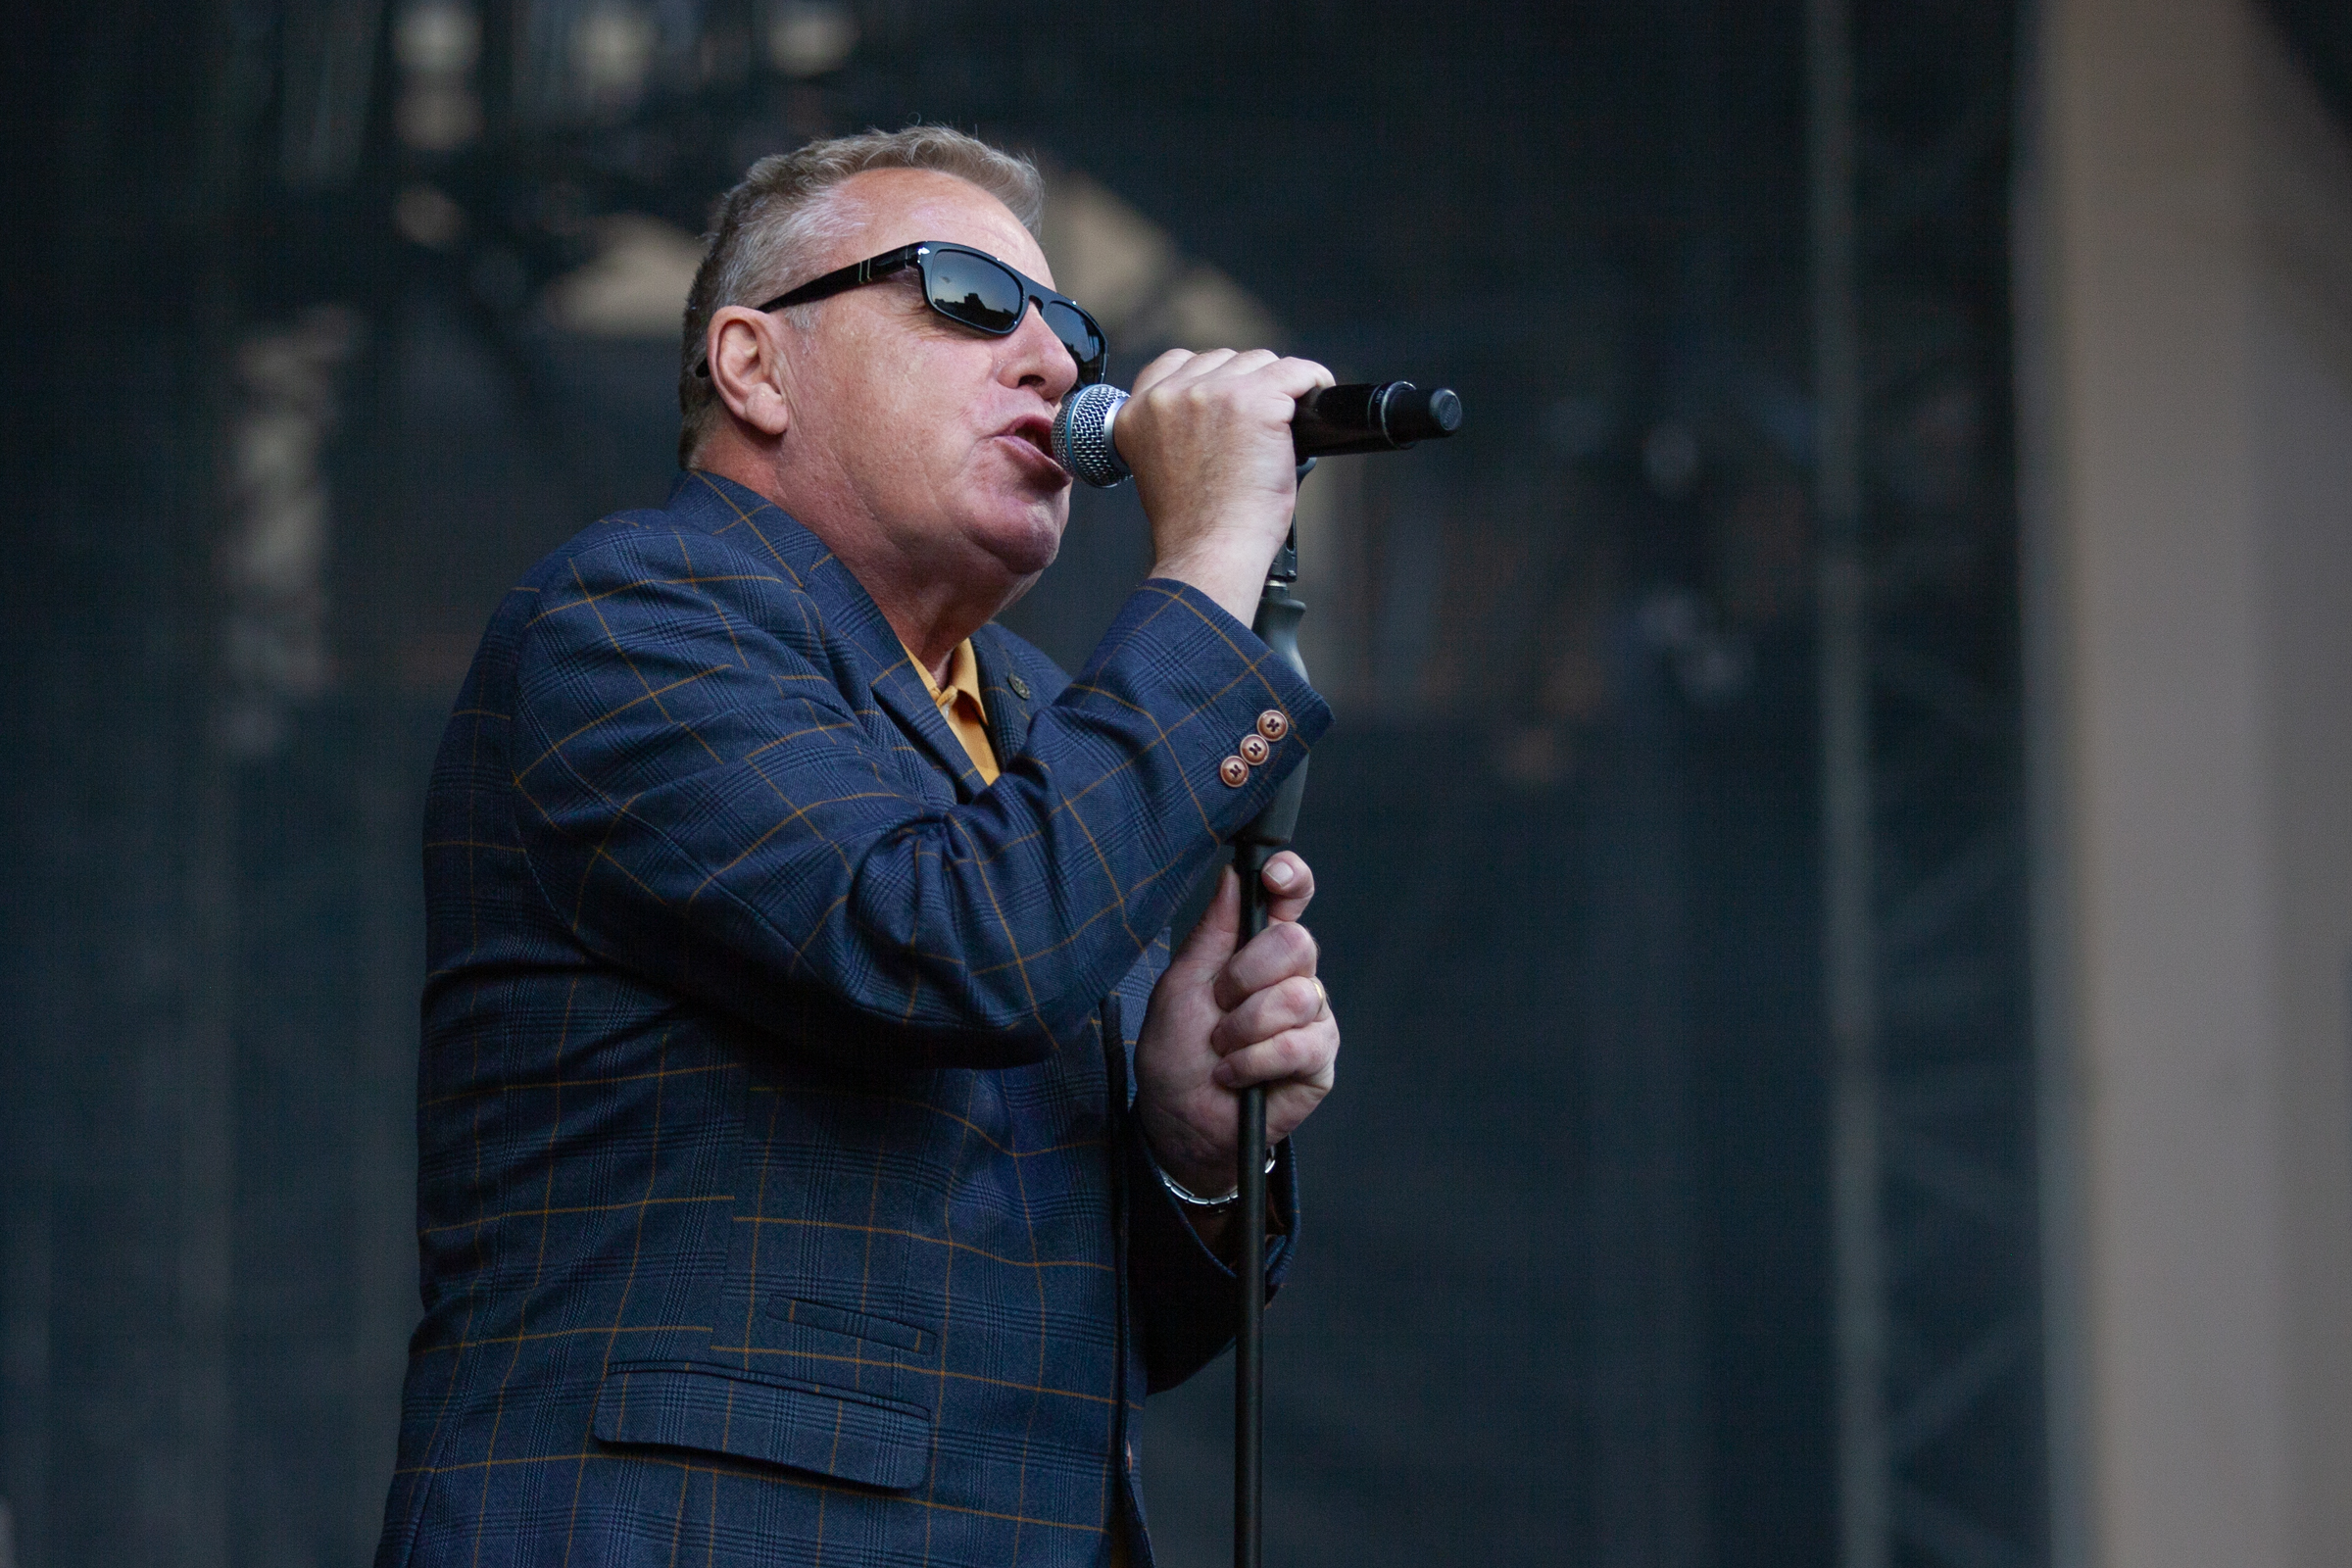 Madness @ The Piece Hall by Frank Ralph Photography